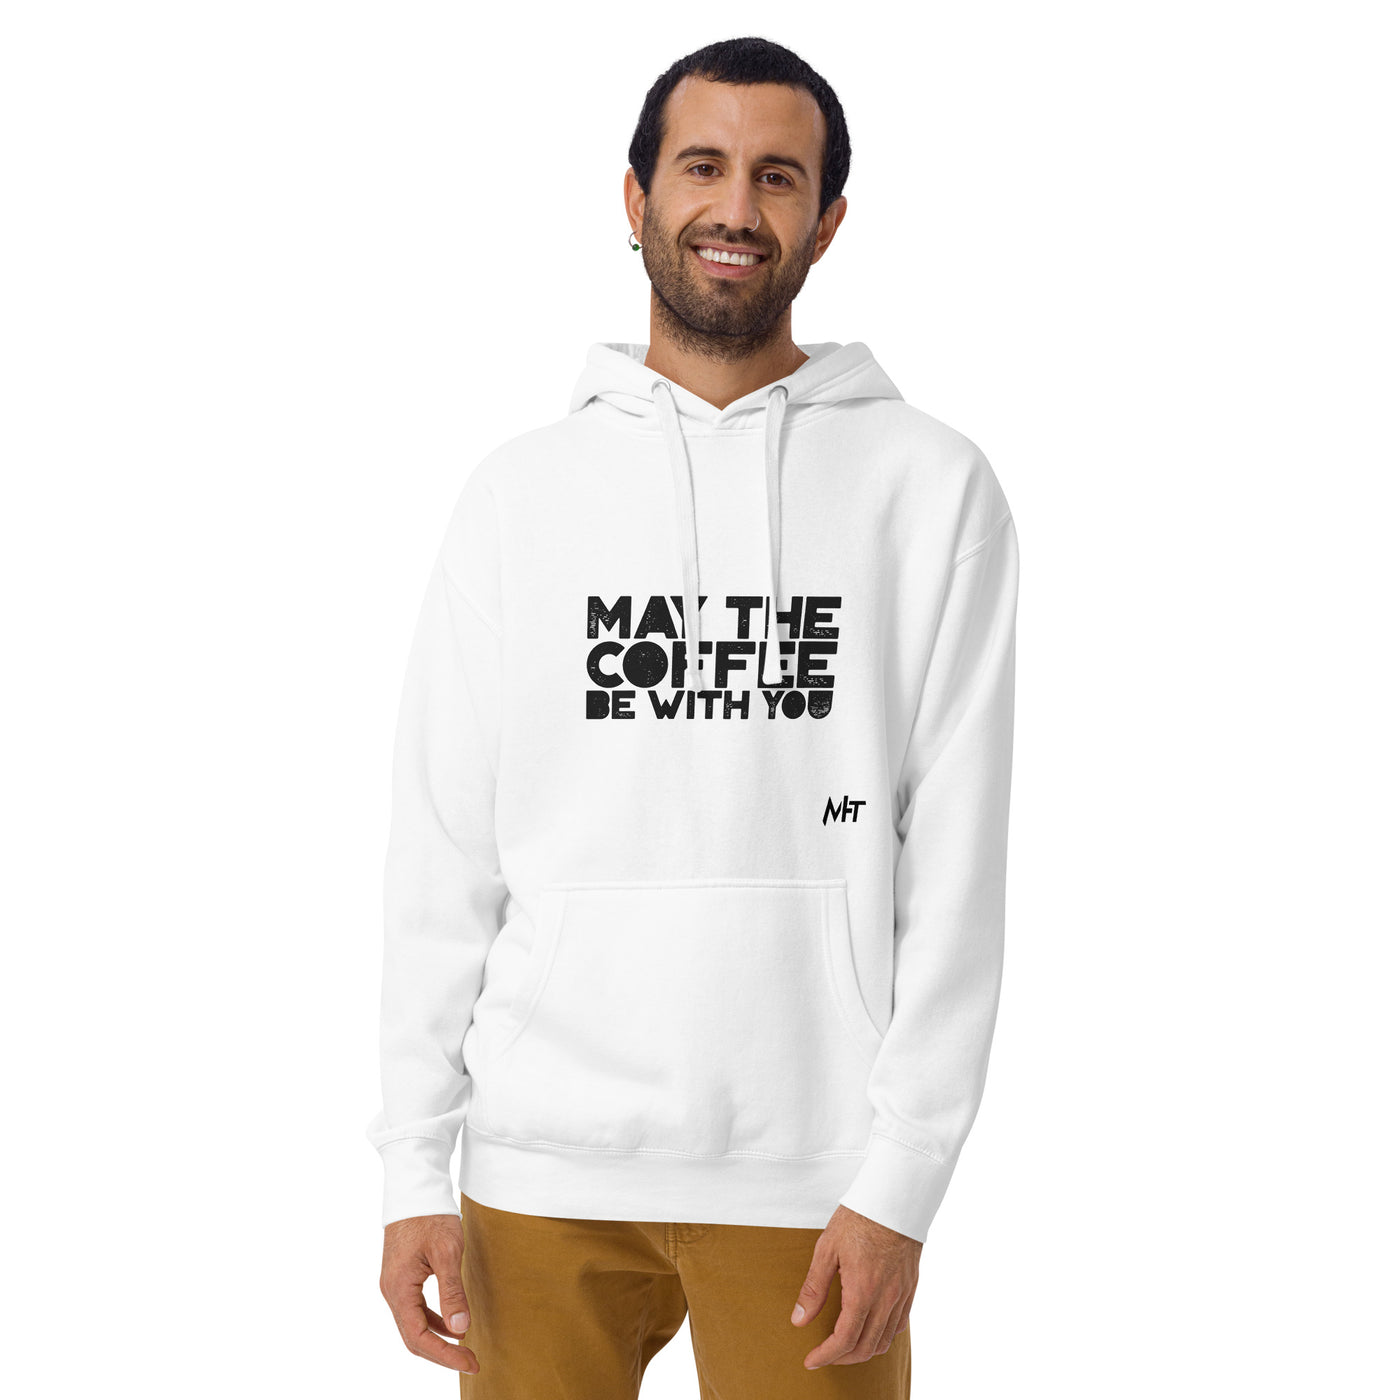 May the Coffee be with You - Unisex Hoodie